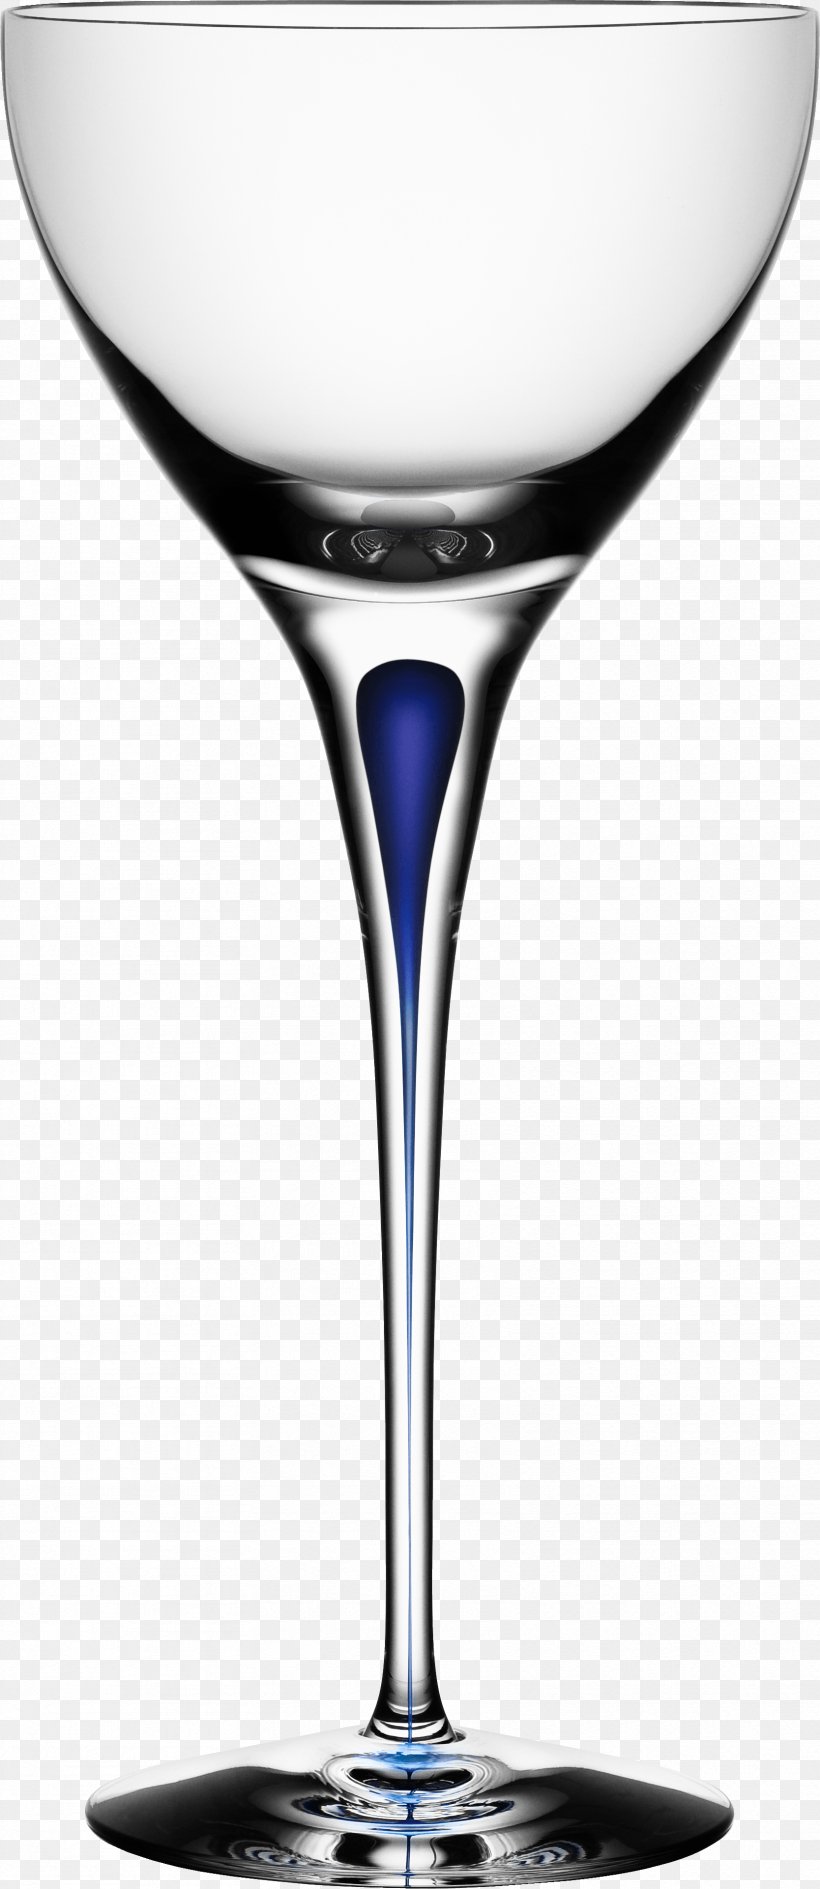 Cocktail Wine Glass Martini Champagne Glass, PNG, 1668x3844px, Wine, Champagne Glass, Champagne Stemware, Cocktail, Cocktail Glass Download Free